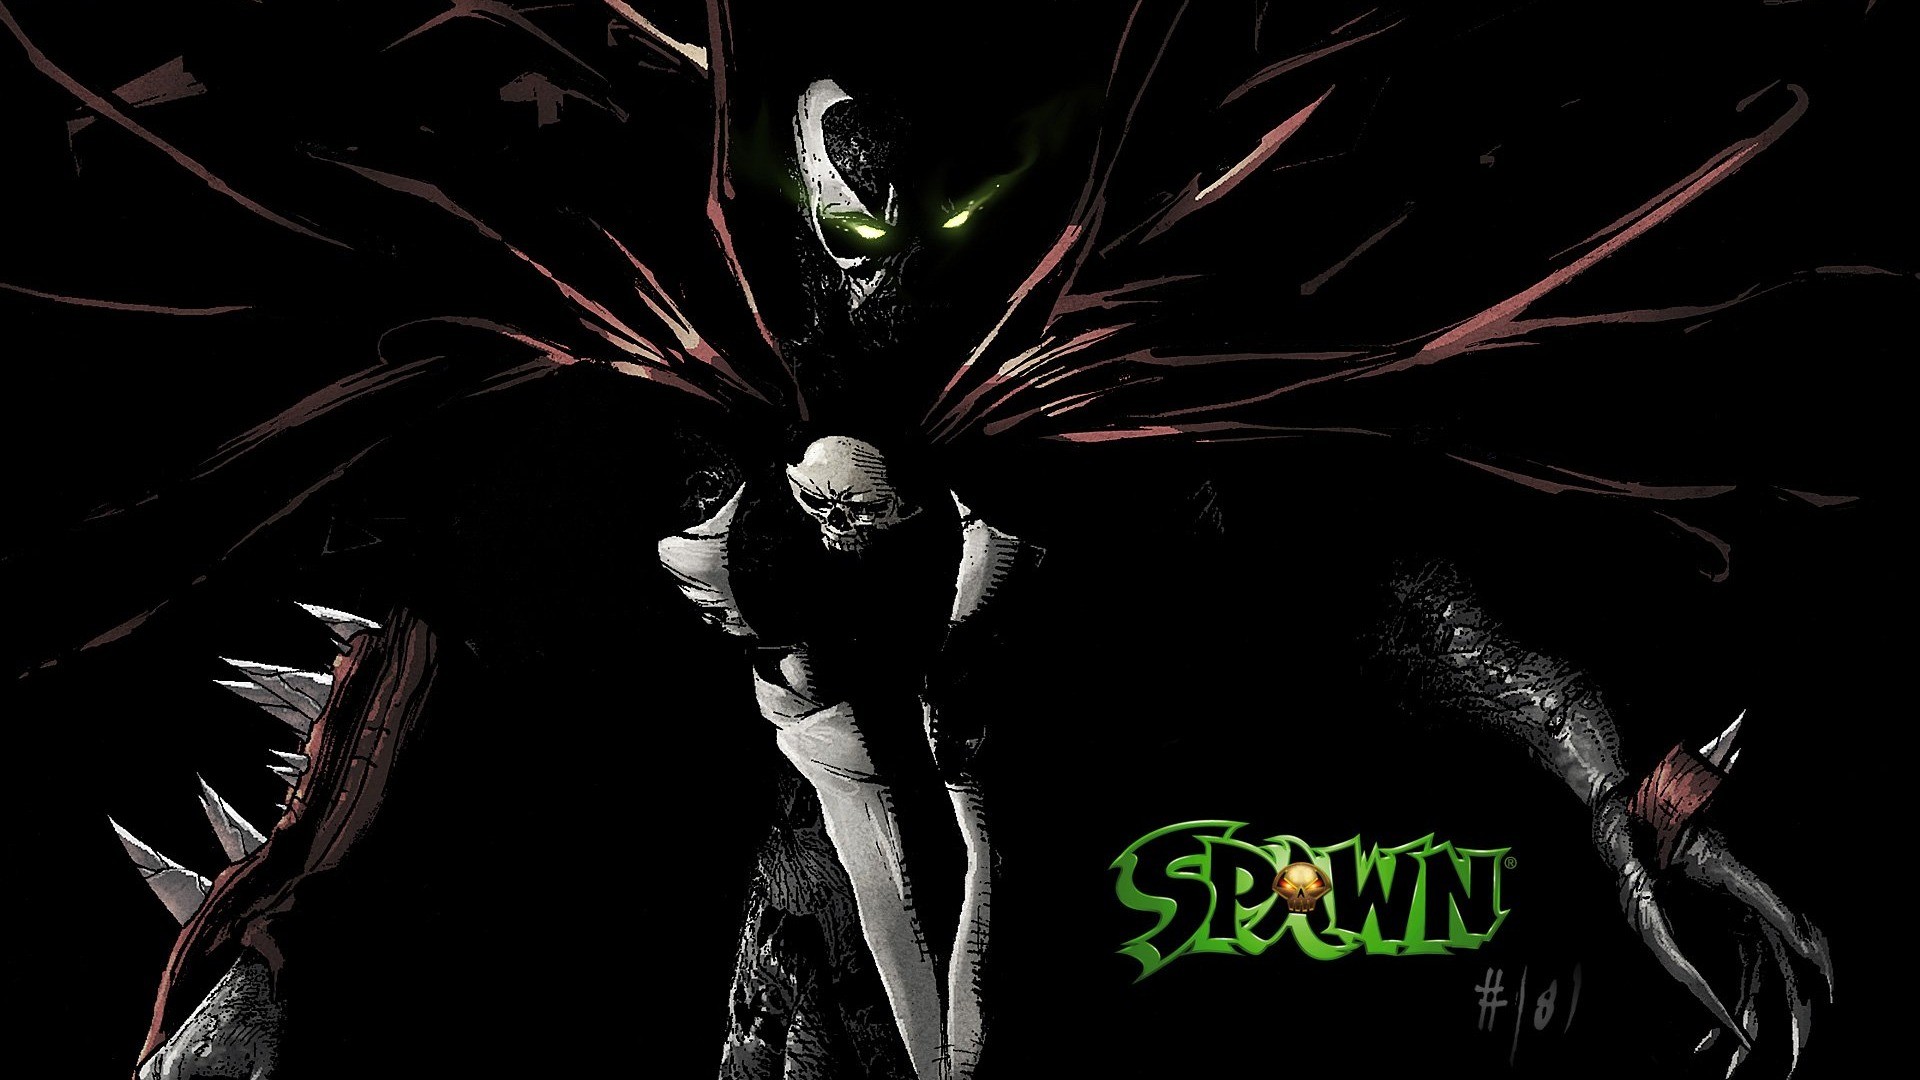 1920x1080 Spawn HD Wallpapers #21 - .